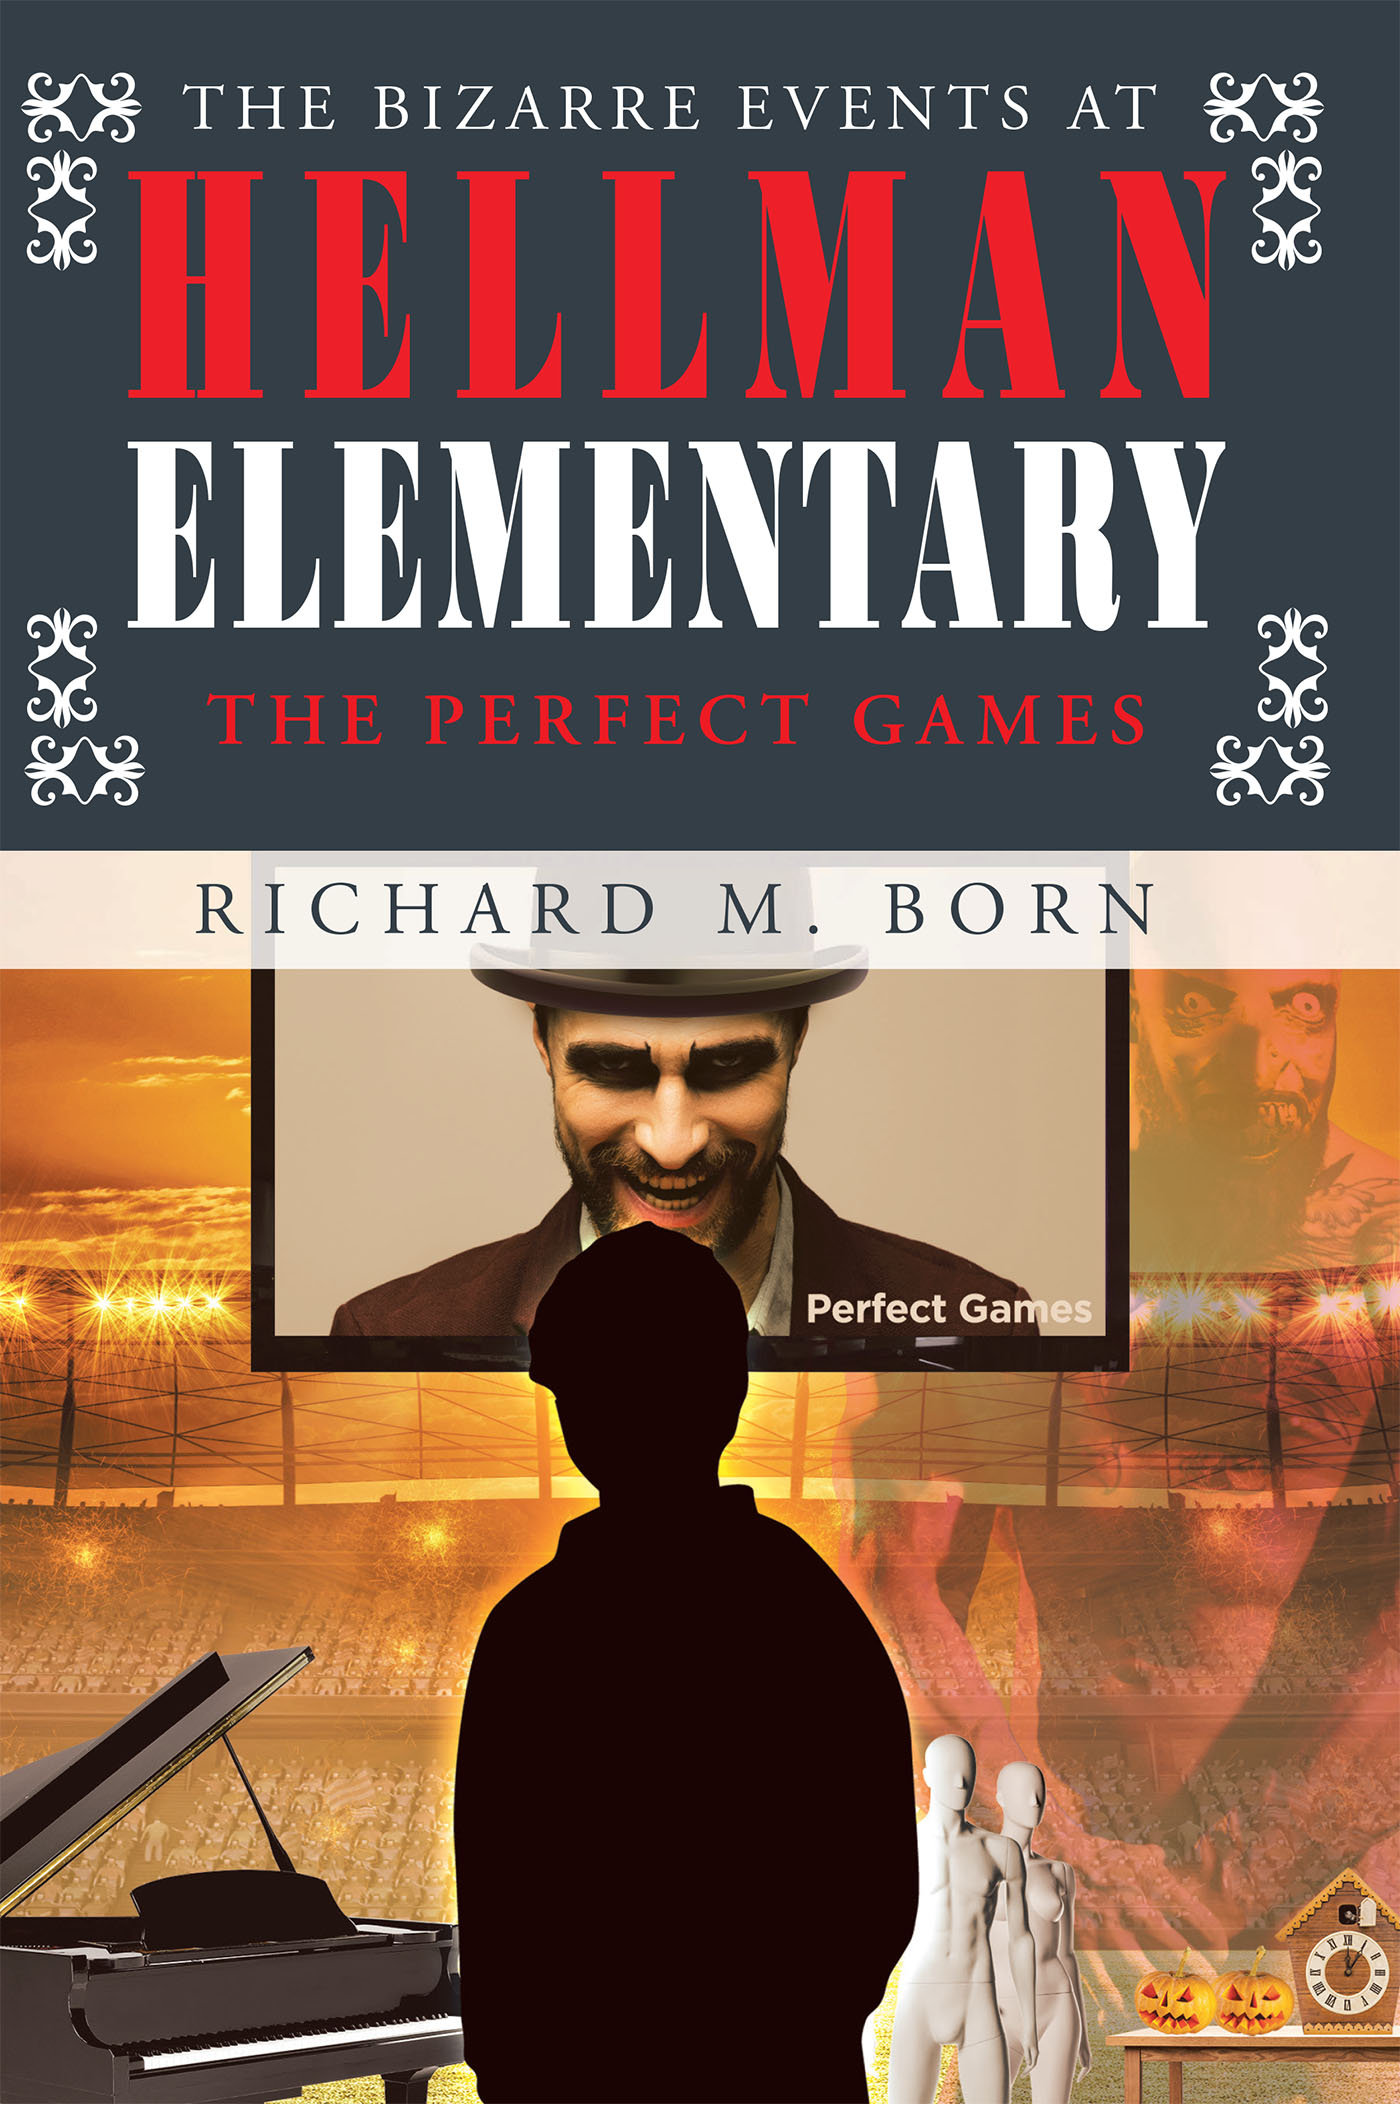 Author Richard M. Born’s New Book, “The Bizarre Events at Hellman Elementary: The Perfect Games,” is About a "Perfect" Student Who Competes at His School